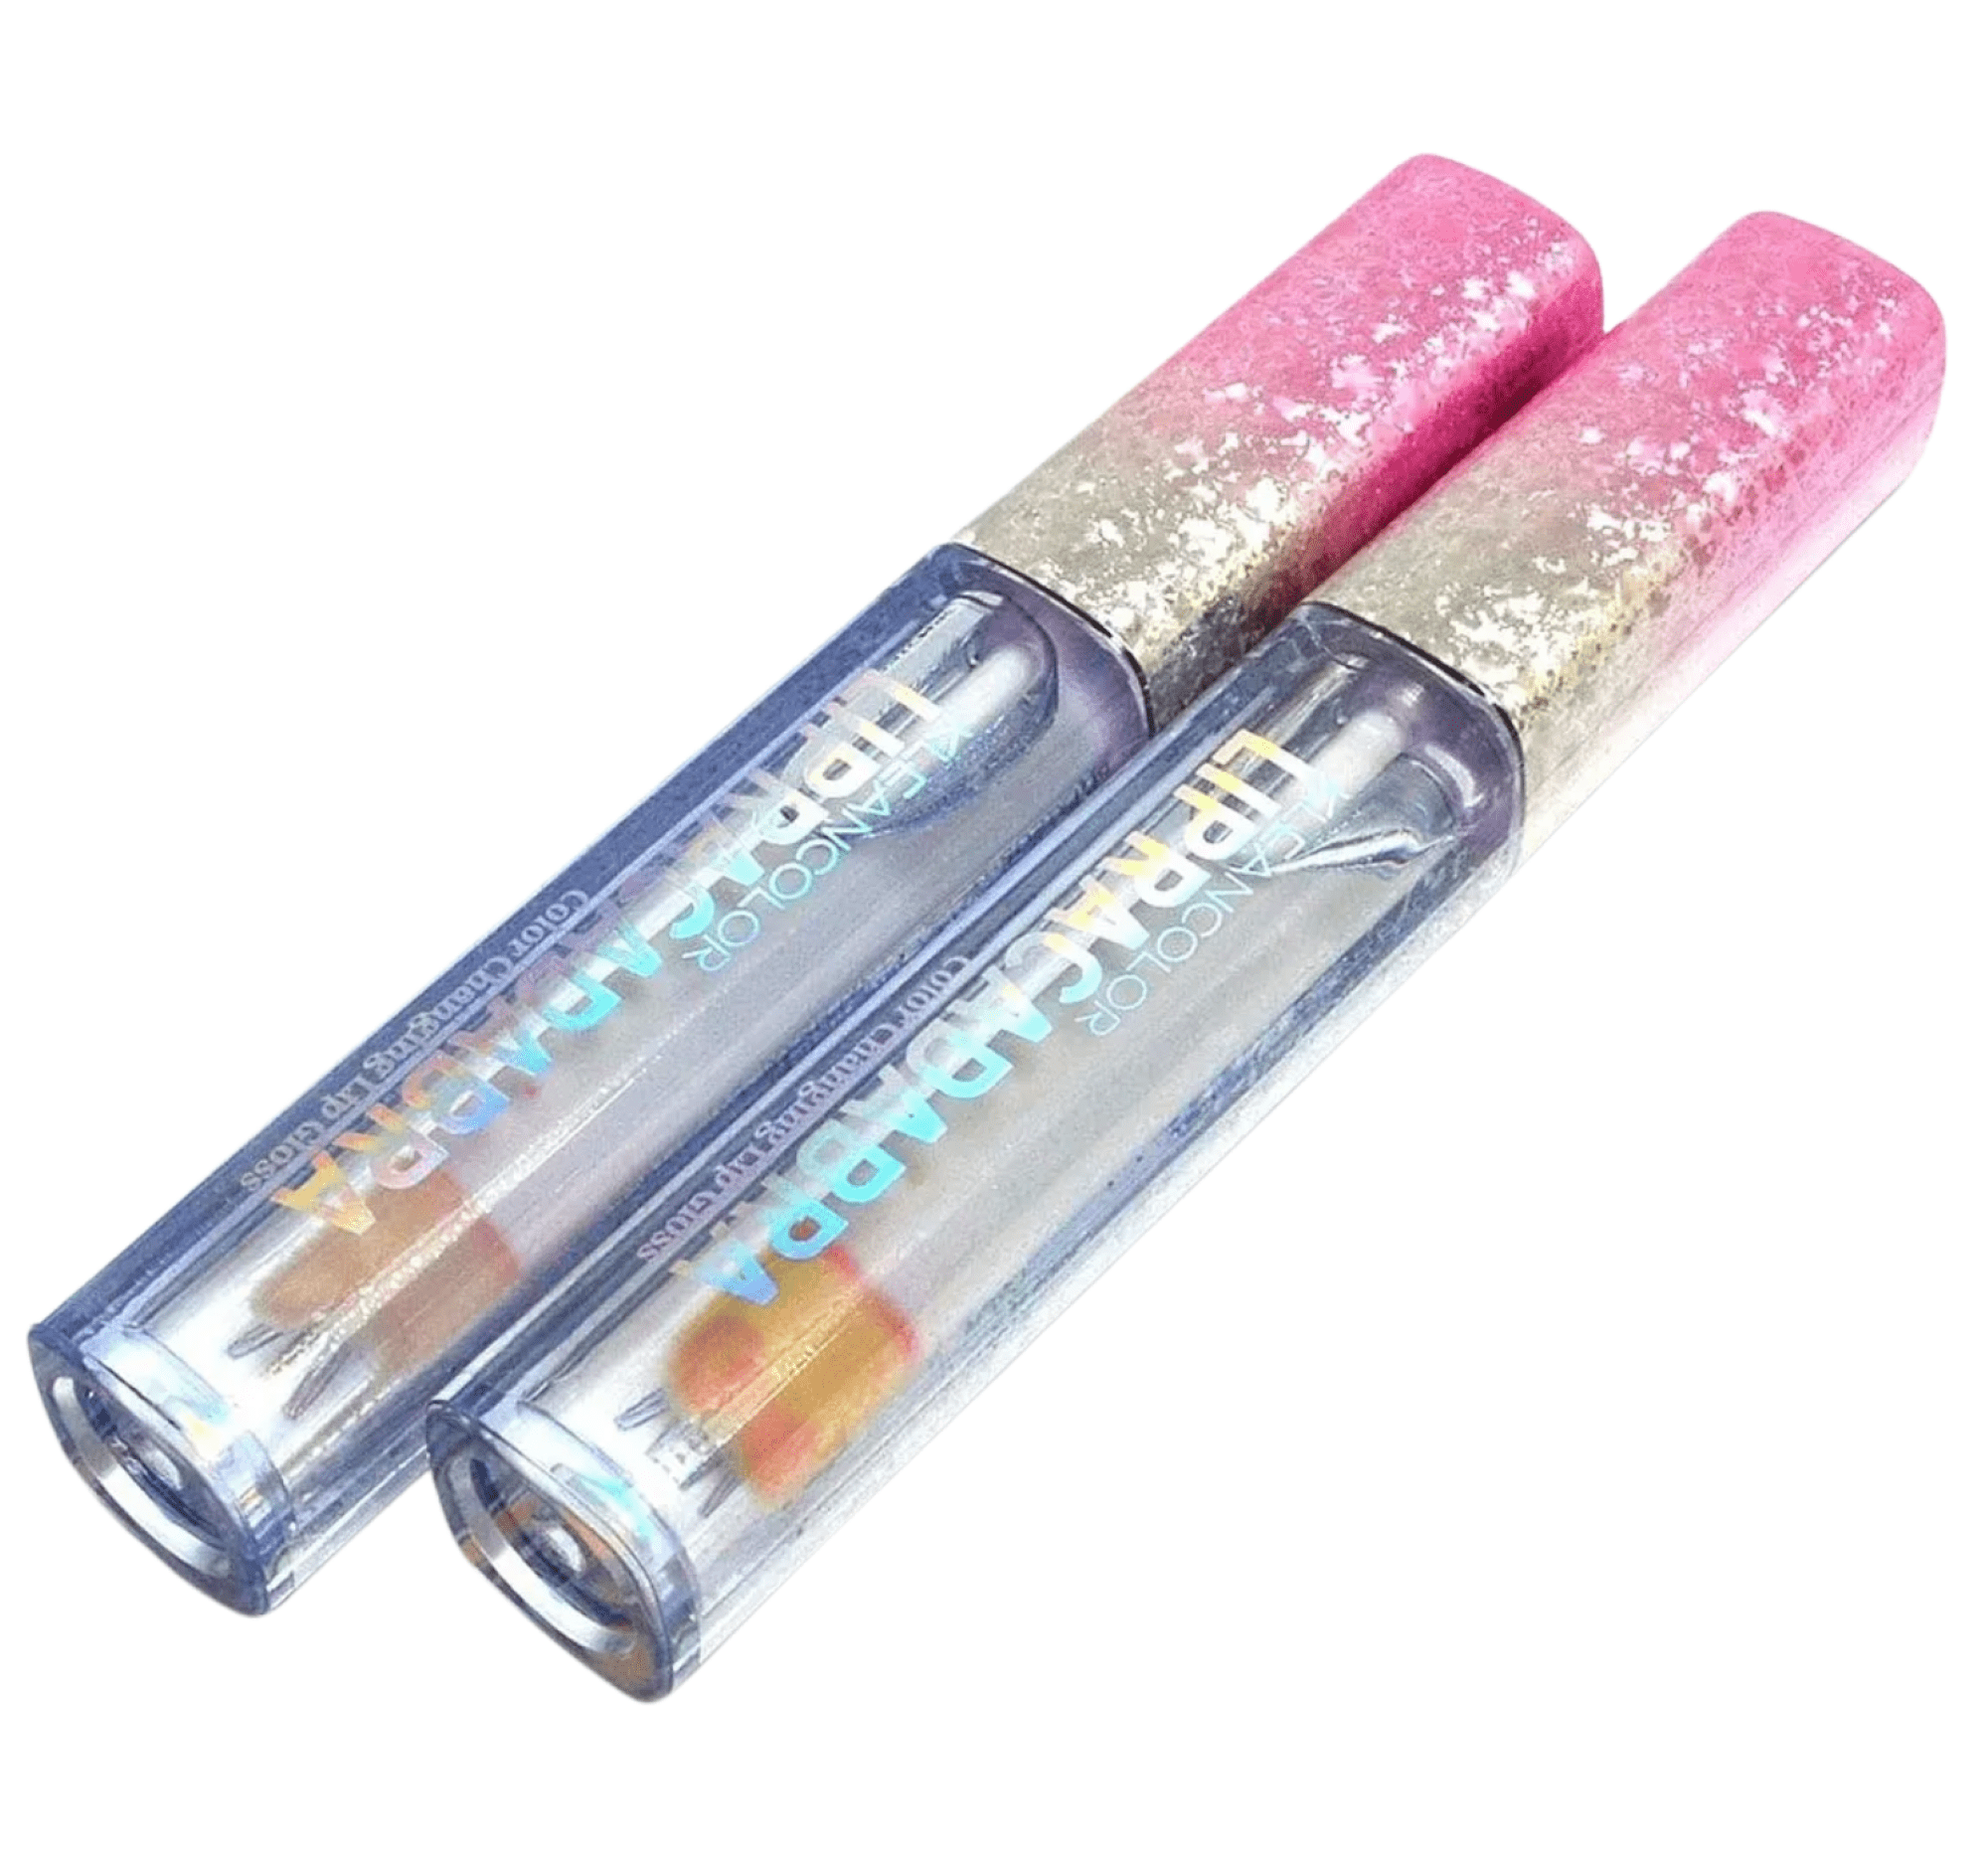 Three Cheers for Girls by Make It Real - 7 Days Glitter Lip Gloss -  Flavored Lip Gloss Set for Girls - Strawberry Raspberry Vanilla and More! -  7 Piece Lip Gloss Kit